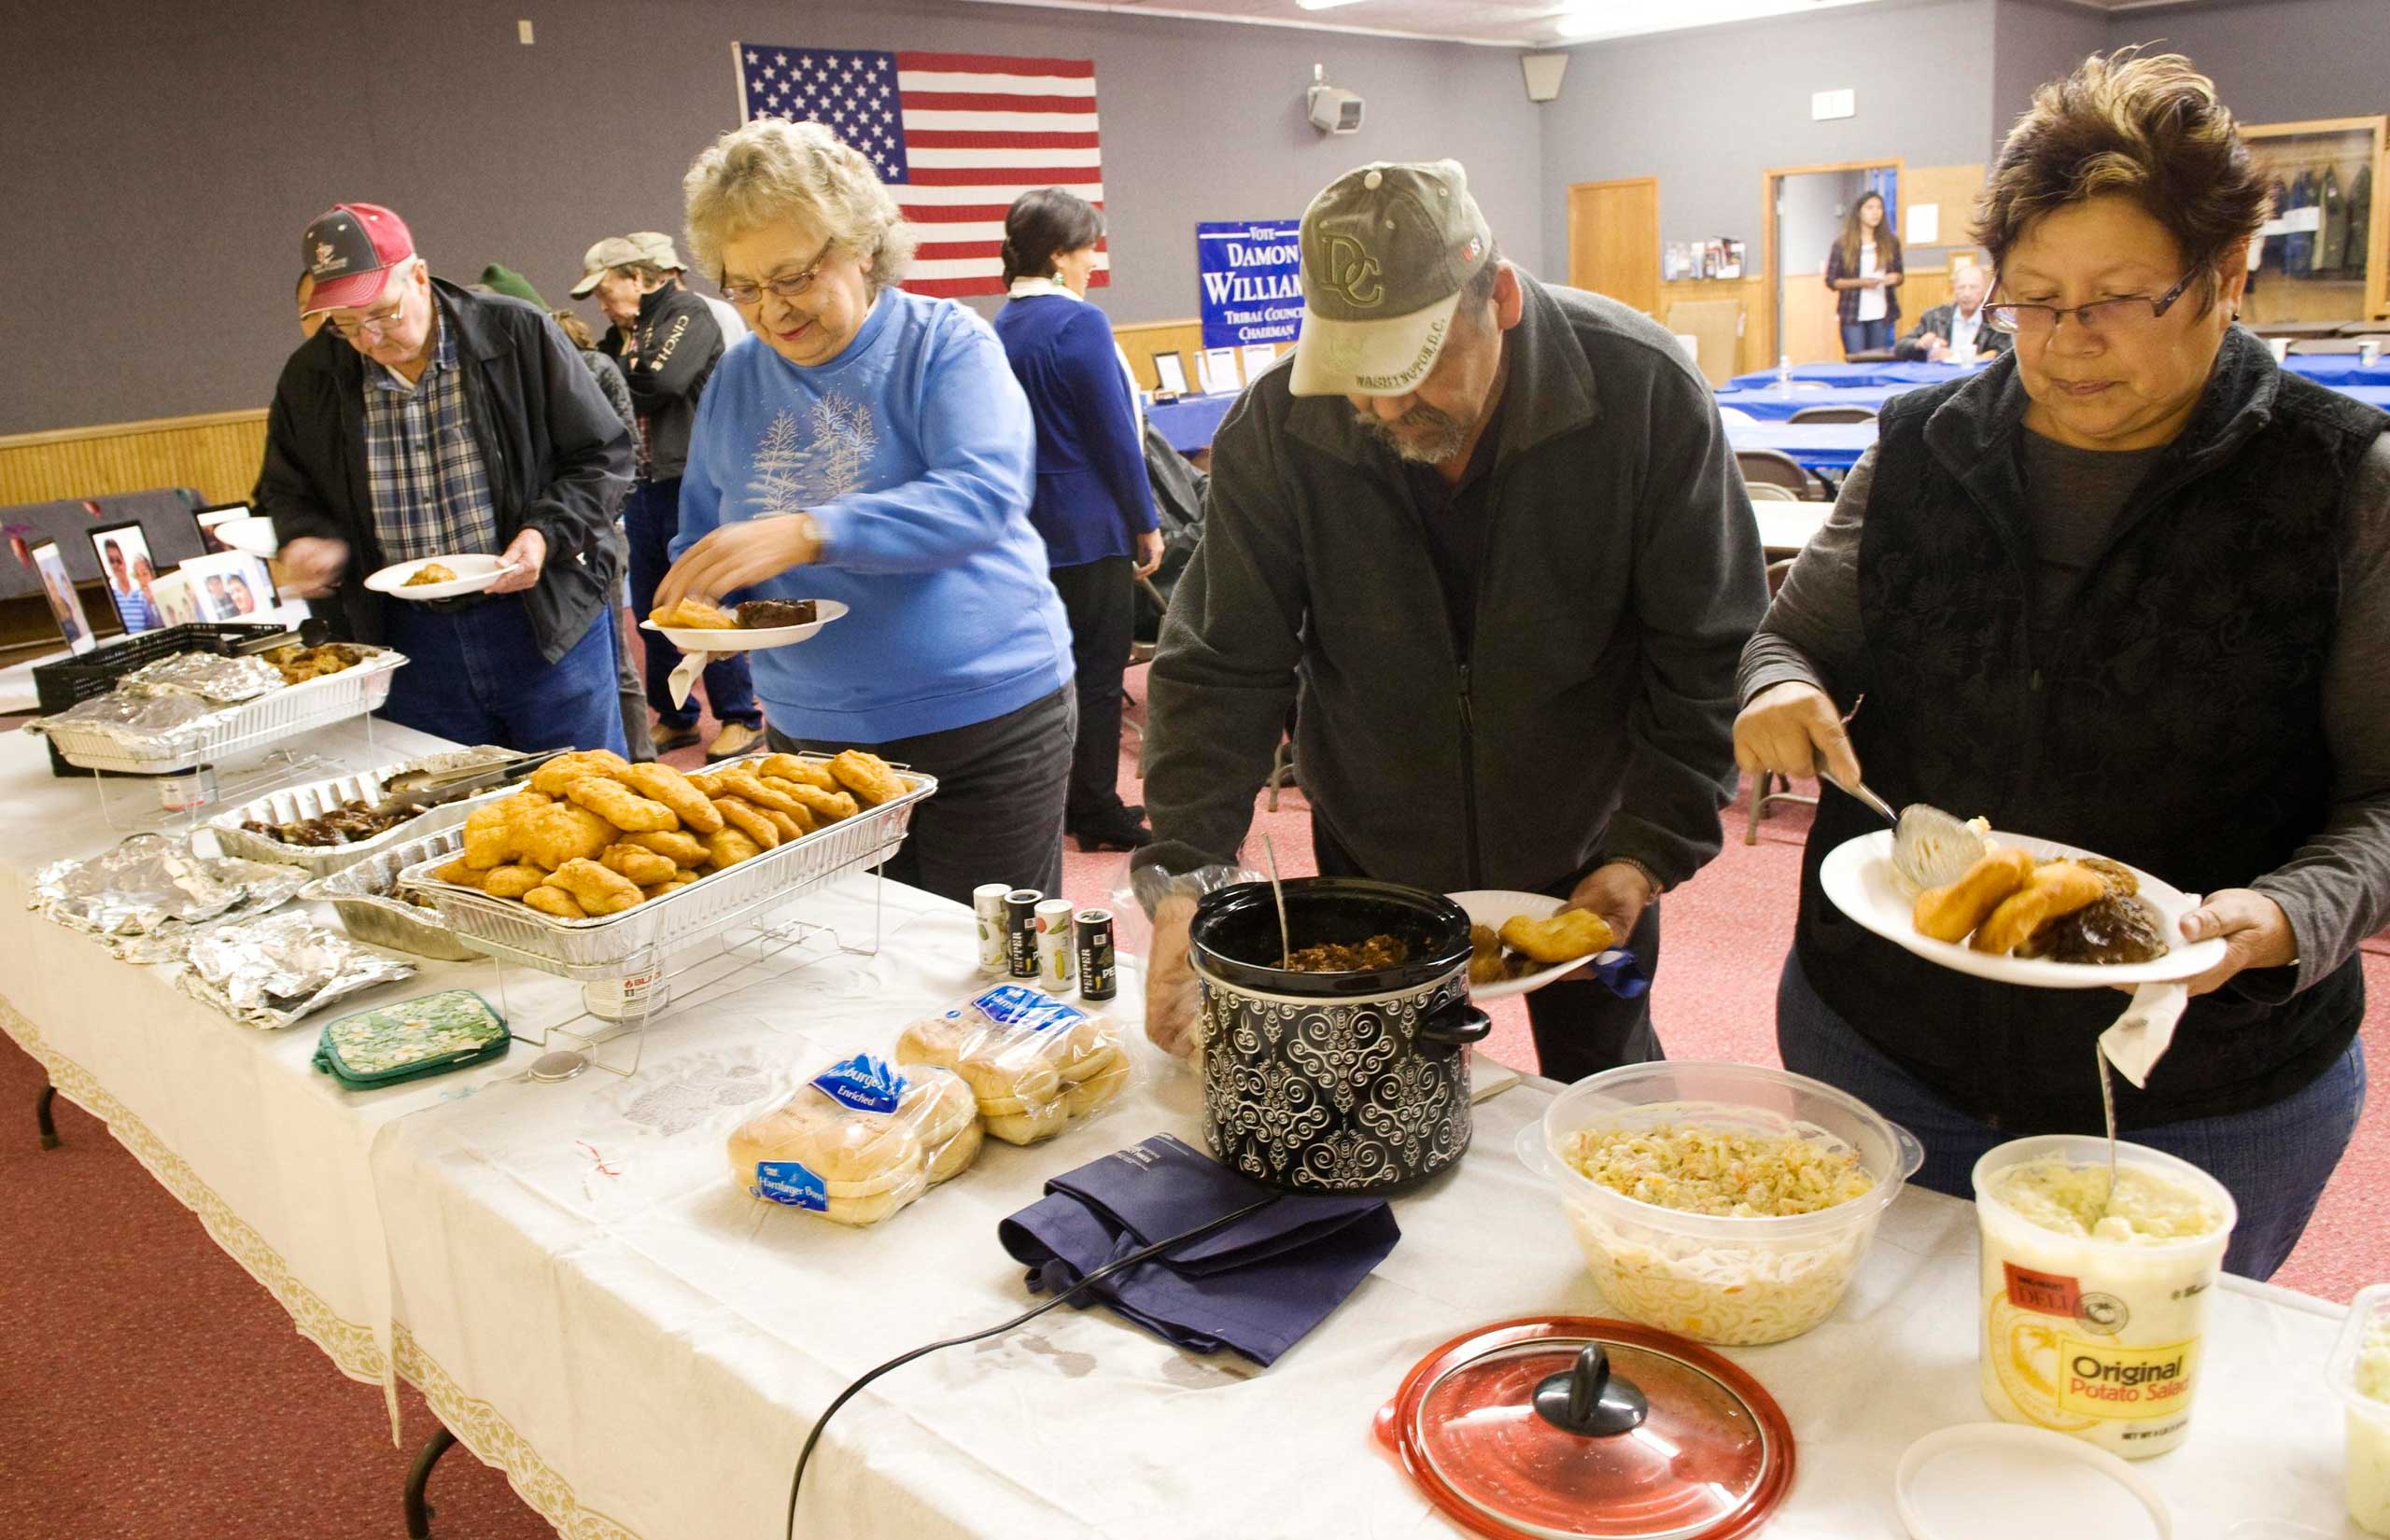 Supporters serve themselves from a buffet during a campaign dinner for Three Affiliated Tribes council chairman candidate Damon Williams on the Fort Berthold Reservation in N.D. on Nov. 1, 2014.